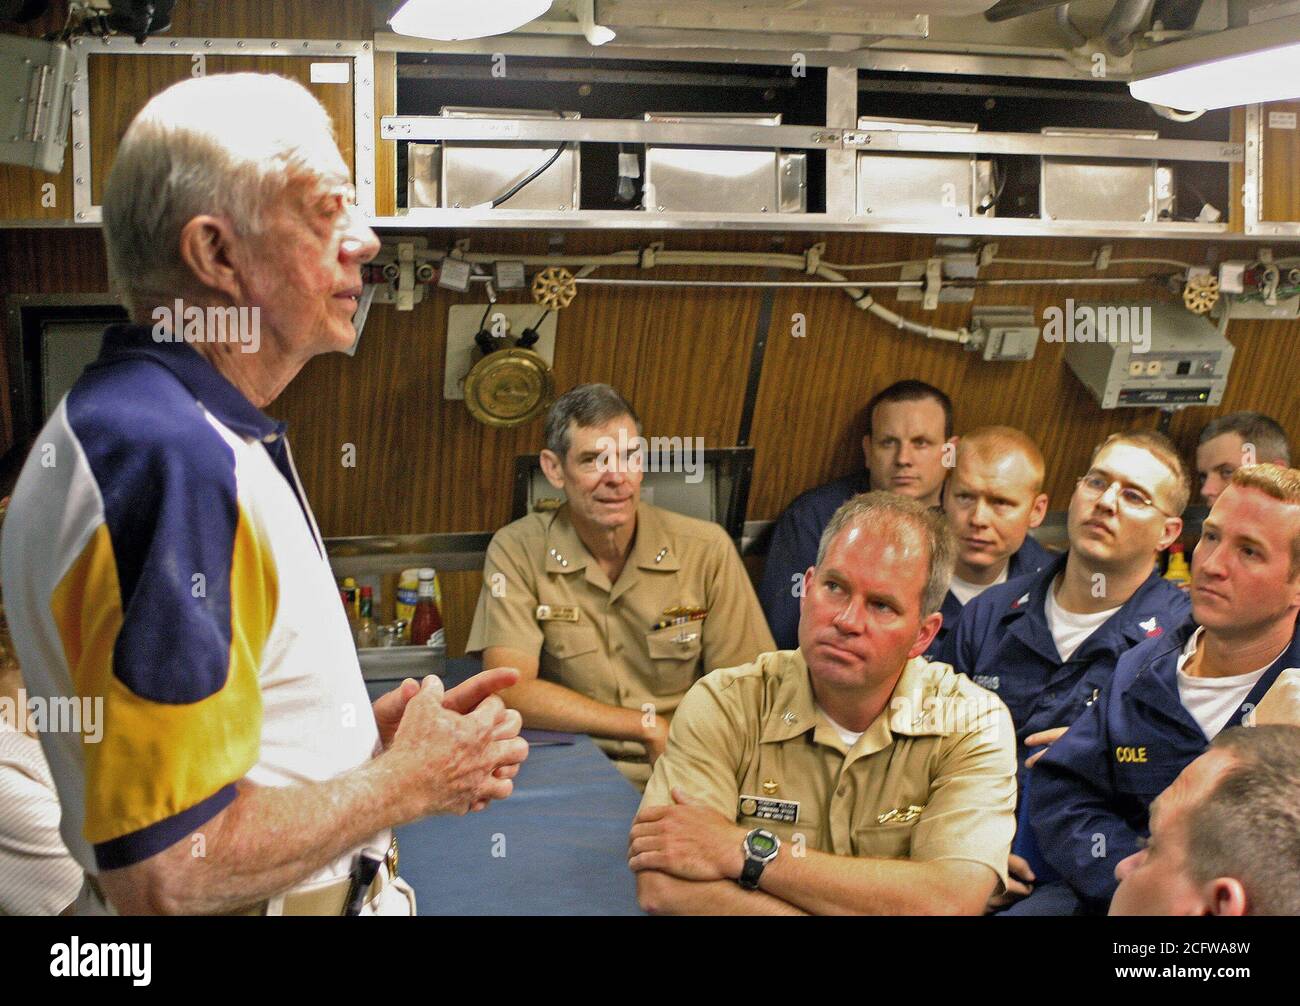 2005 - Former US President James E. Carter addresses the crew onboard his namesake ship, the Sea Wolf Class Attack Submarine USS JIMMY CARTER (SSN 23) in the crew's mess. President Carter and his wife, Rosalynn, spent the night aboard the submarine, touring the ship and meeting with crew members. The USS JIMMY CARTER is the third in Sea Wolf Class Attack Submarine. Stock Photo